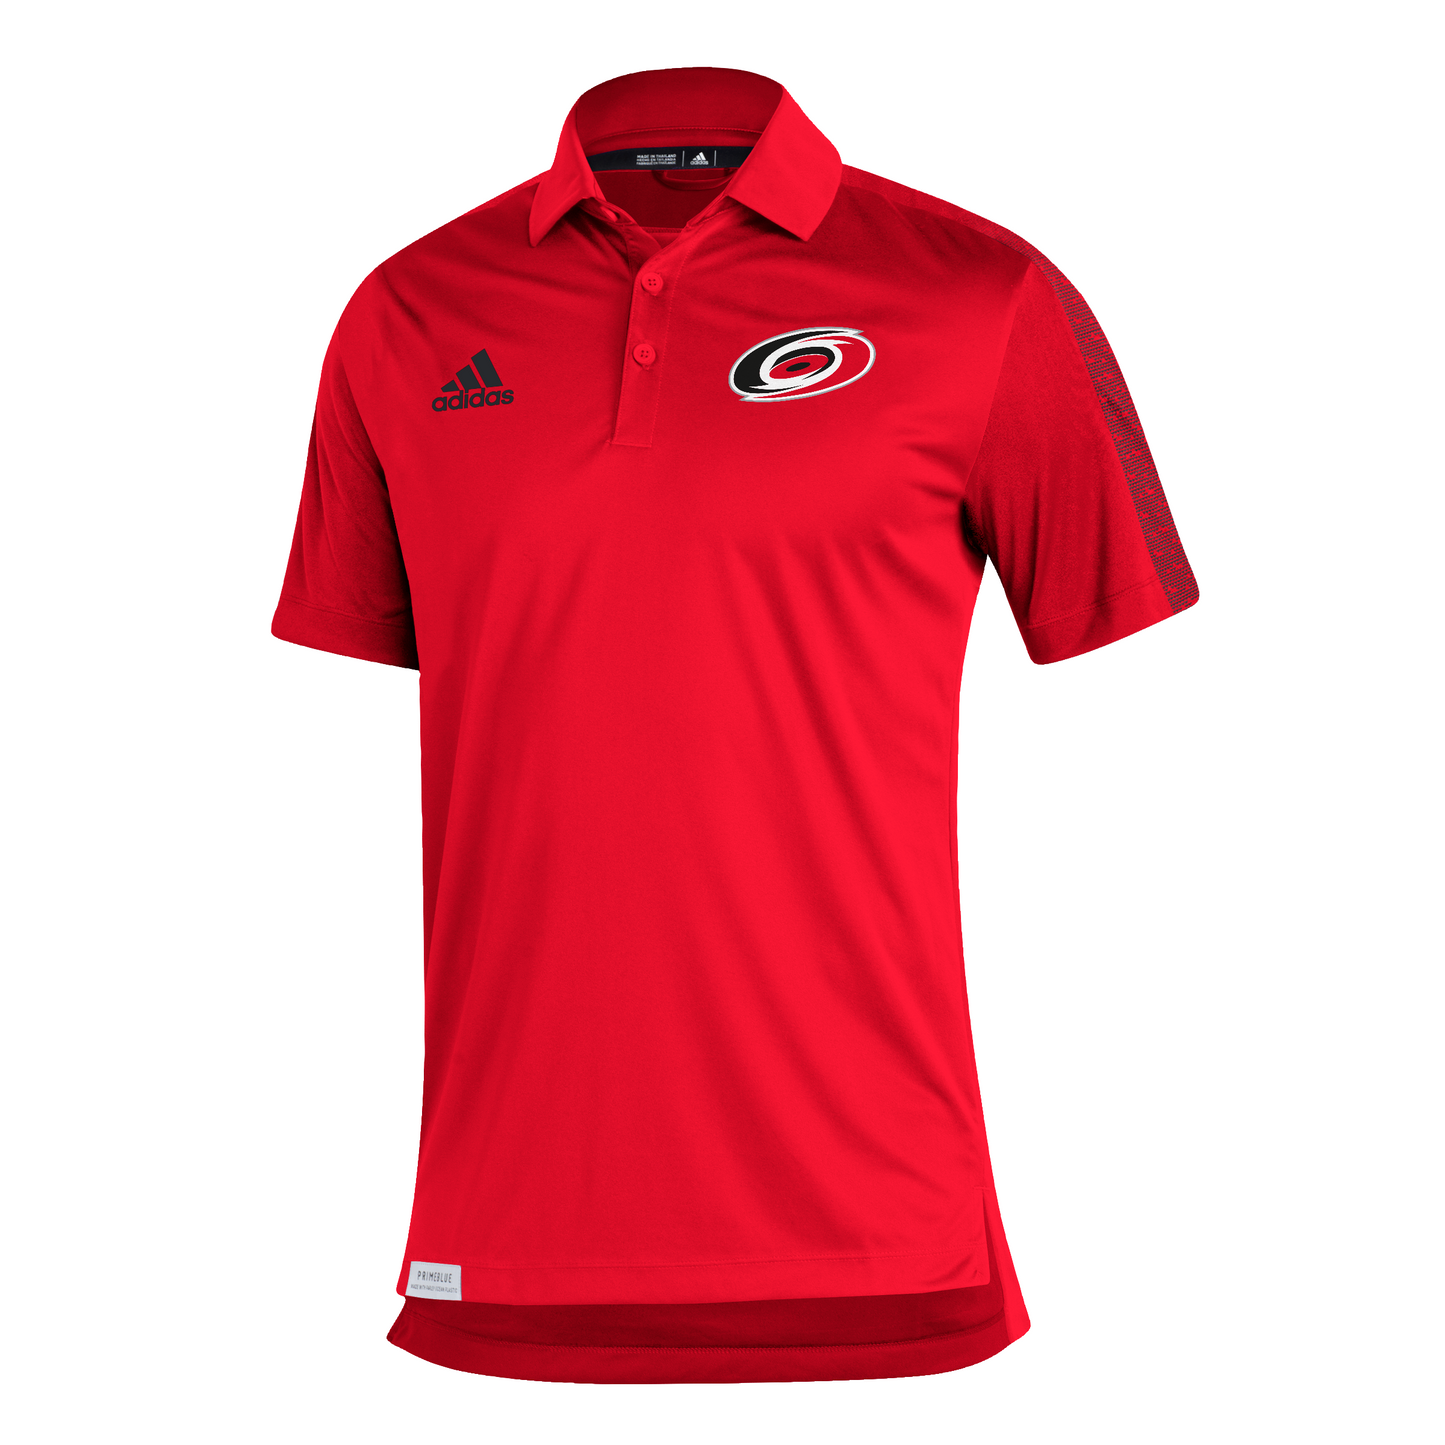 Front View: Red polo with Hurricanes primary logo and black Adidas logo on chest.